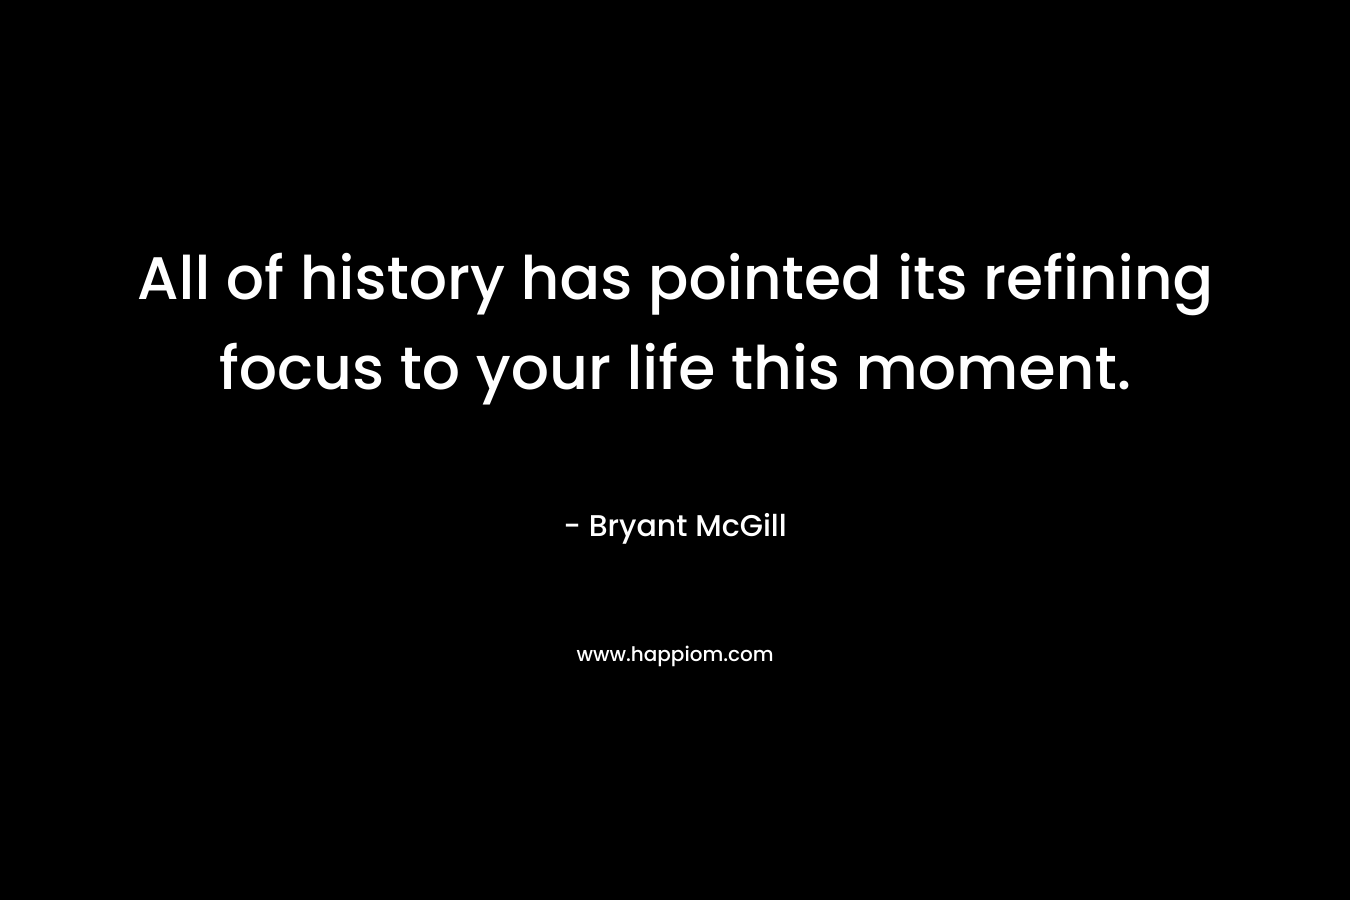 All of history has pointed its refining focus to your life this moment.